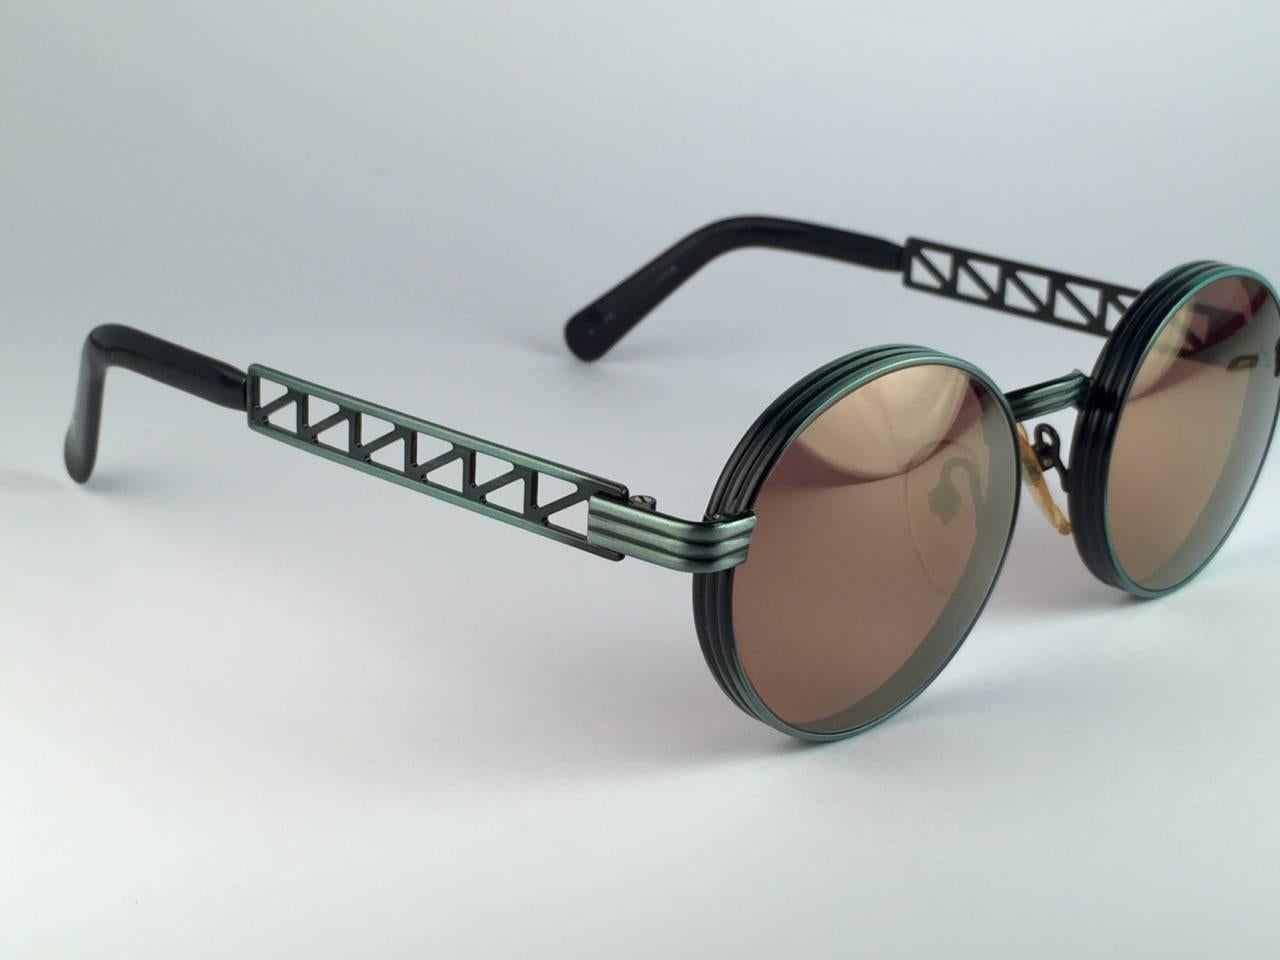 Superb Collectors Item!!
New Jean Paul Gaultier 56 0173 Eiffel Tower Series Ornaments on the temples over a emerald green frame. 
Spotless Amber mirror lenses that complete a ready to wear JPG look.

Amazing design with strong yet intricate